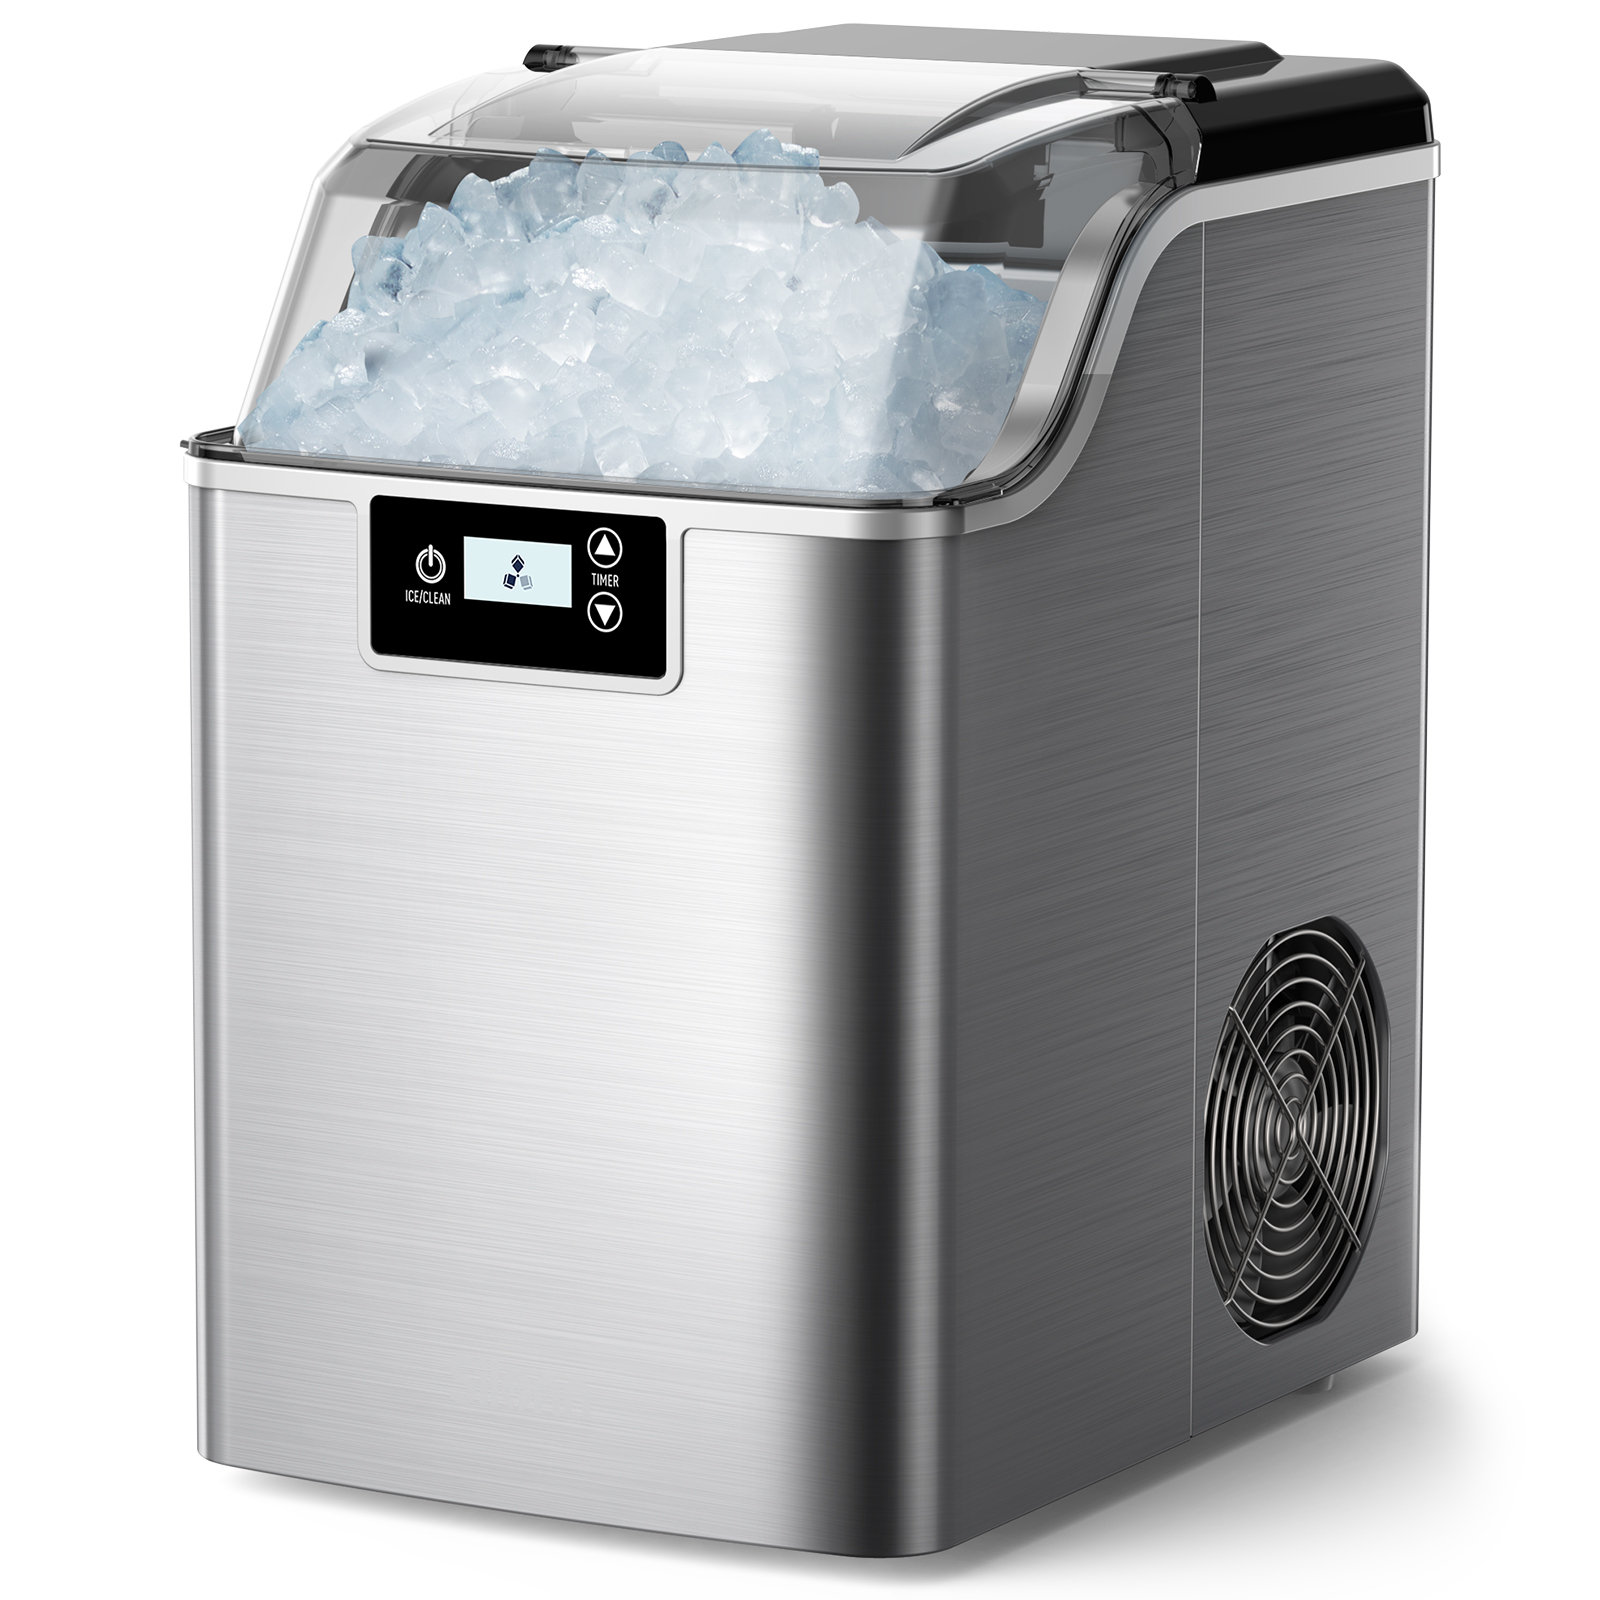 NewAir Nugget Ice Maker, Sonic Speed Countertop Crunchy Ice Pellet Machine  40 lbs. of Ice a Day in Stainless Steel, Self Cleaning Function and